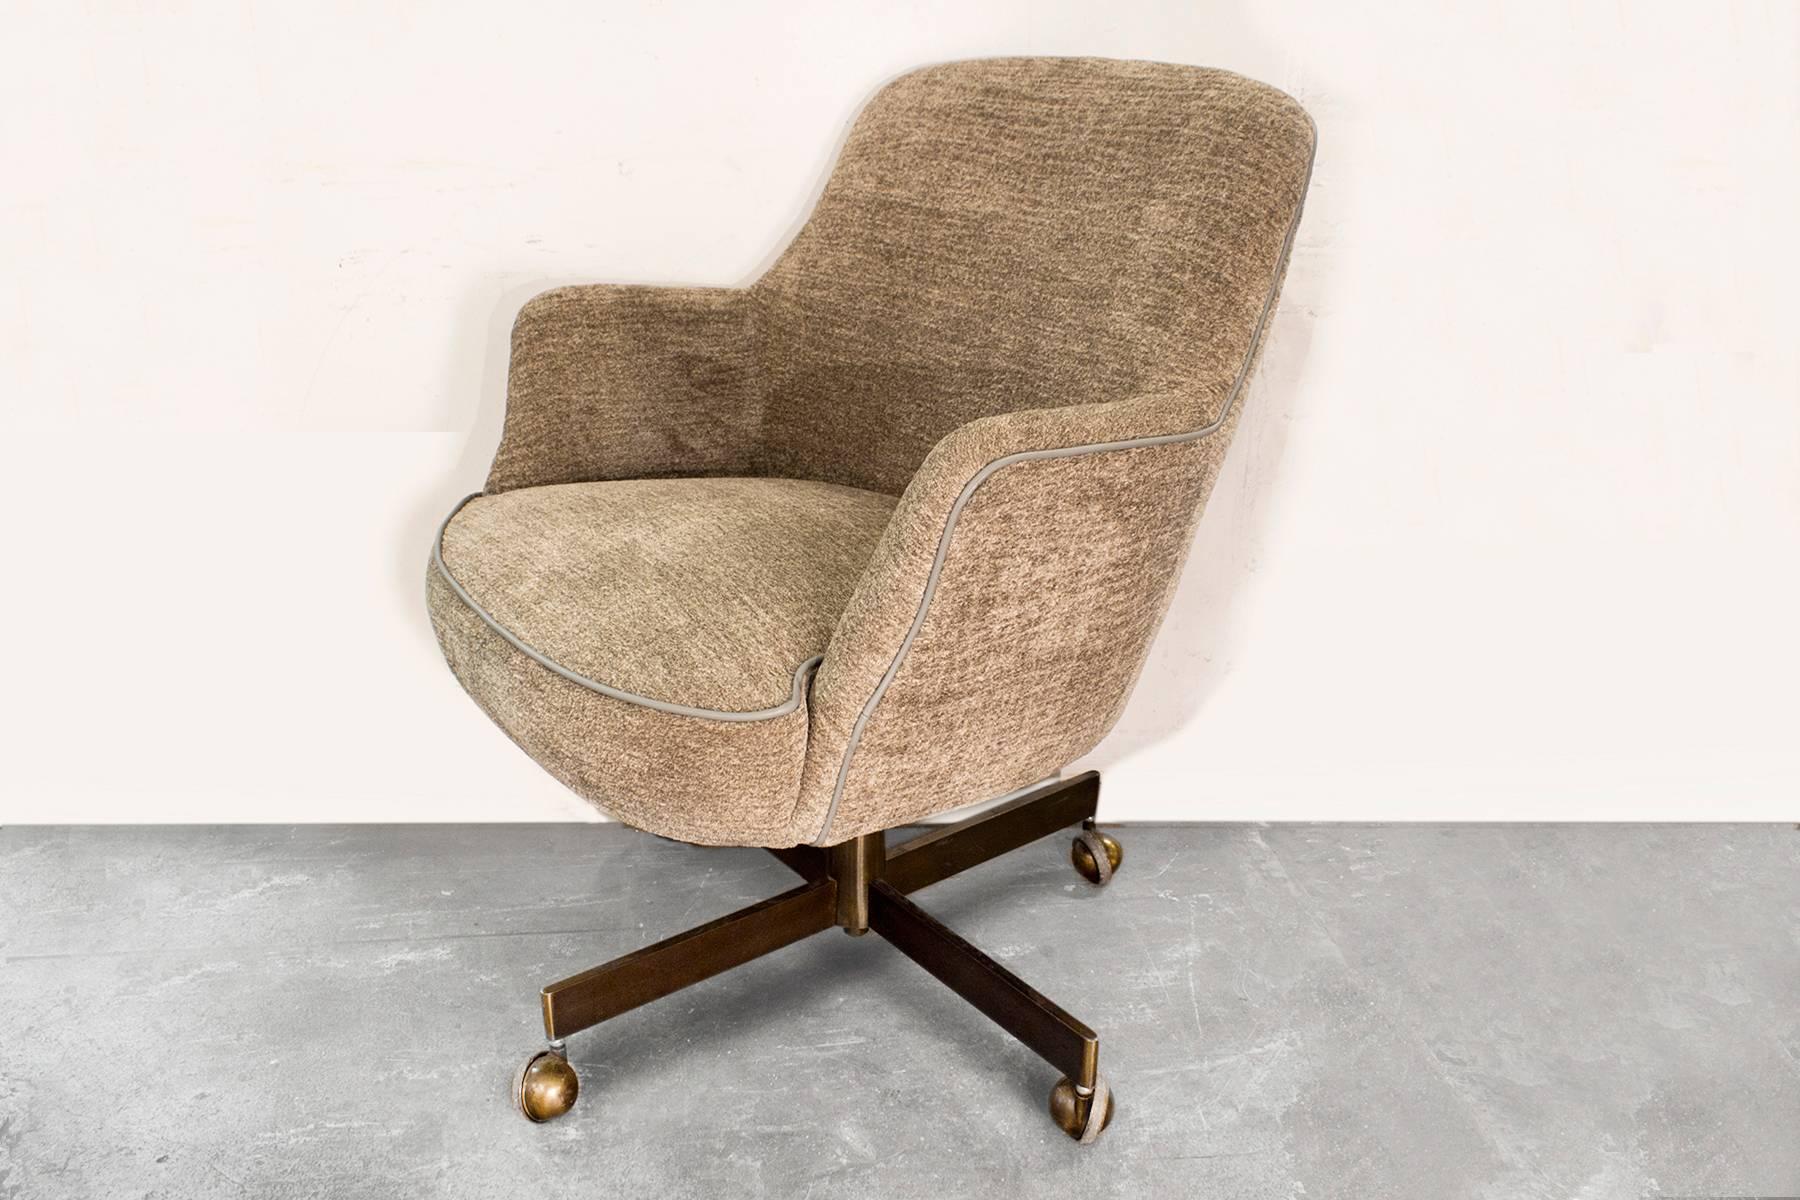 Super comfy bucket chair reupholstered in a creamy grey chenille fabric. Brass plated base and casters. Great for the home or office. Adjustable seat height and tilt mechanism.

Dimensions: 26″ D x 26″ W x 33″ H.
Seat height: 16-20.